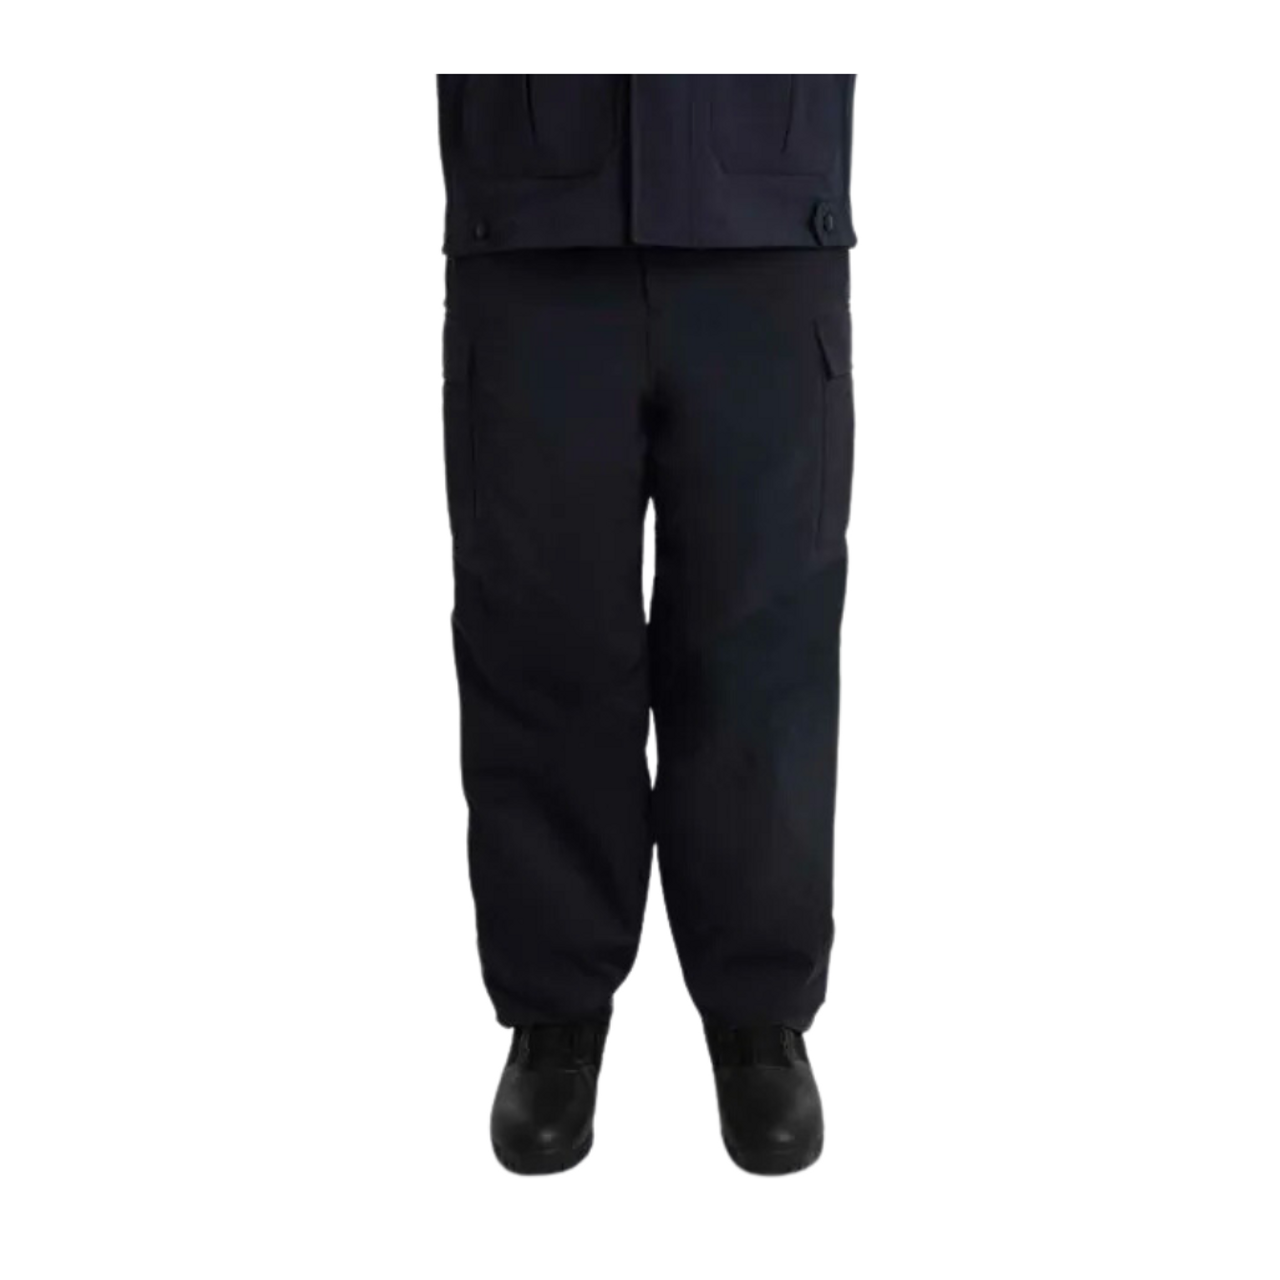 TacShell Pants with Suspenders